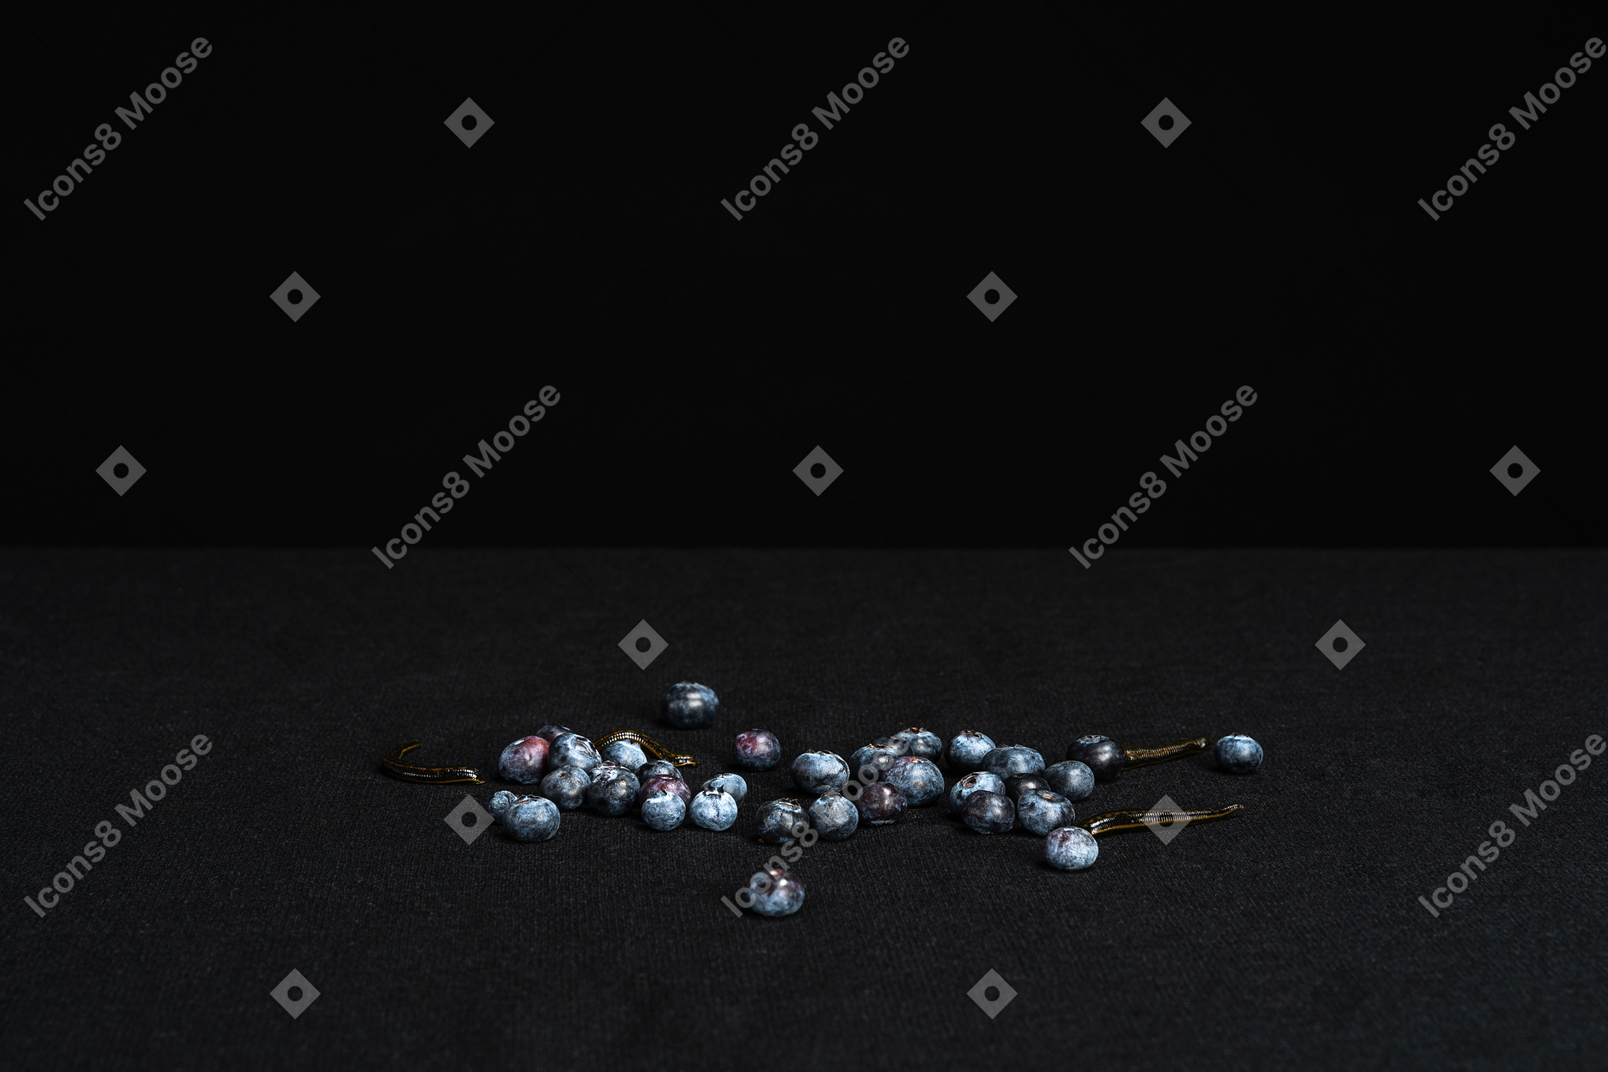 Leeches crawling among blueberries in black background